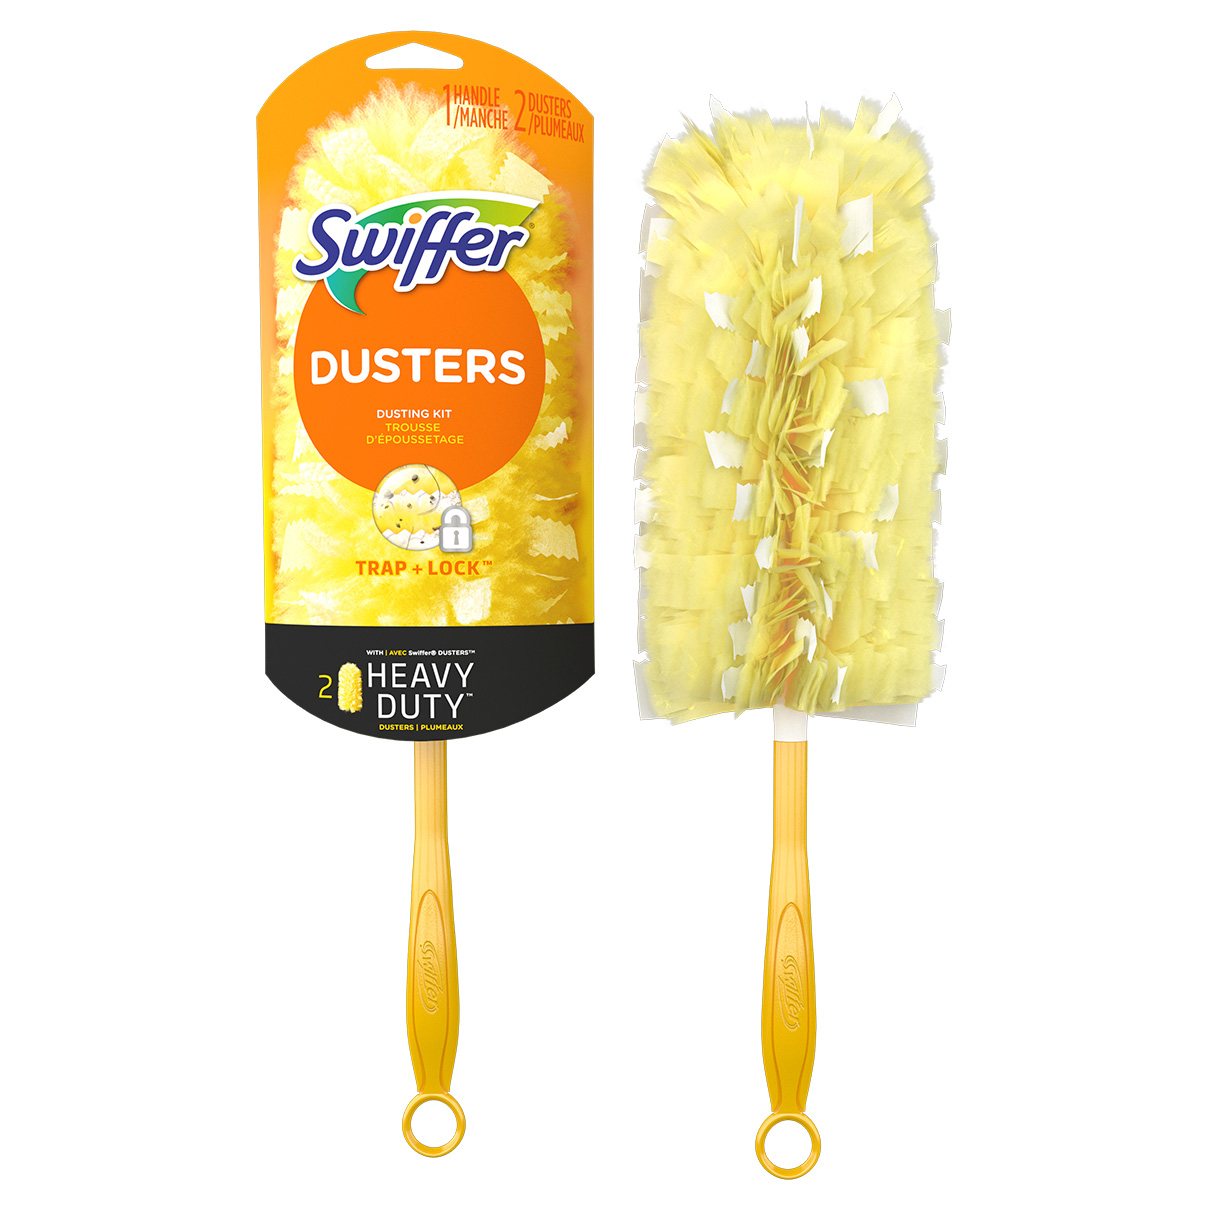 Shop All Swiffer Dusting Products